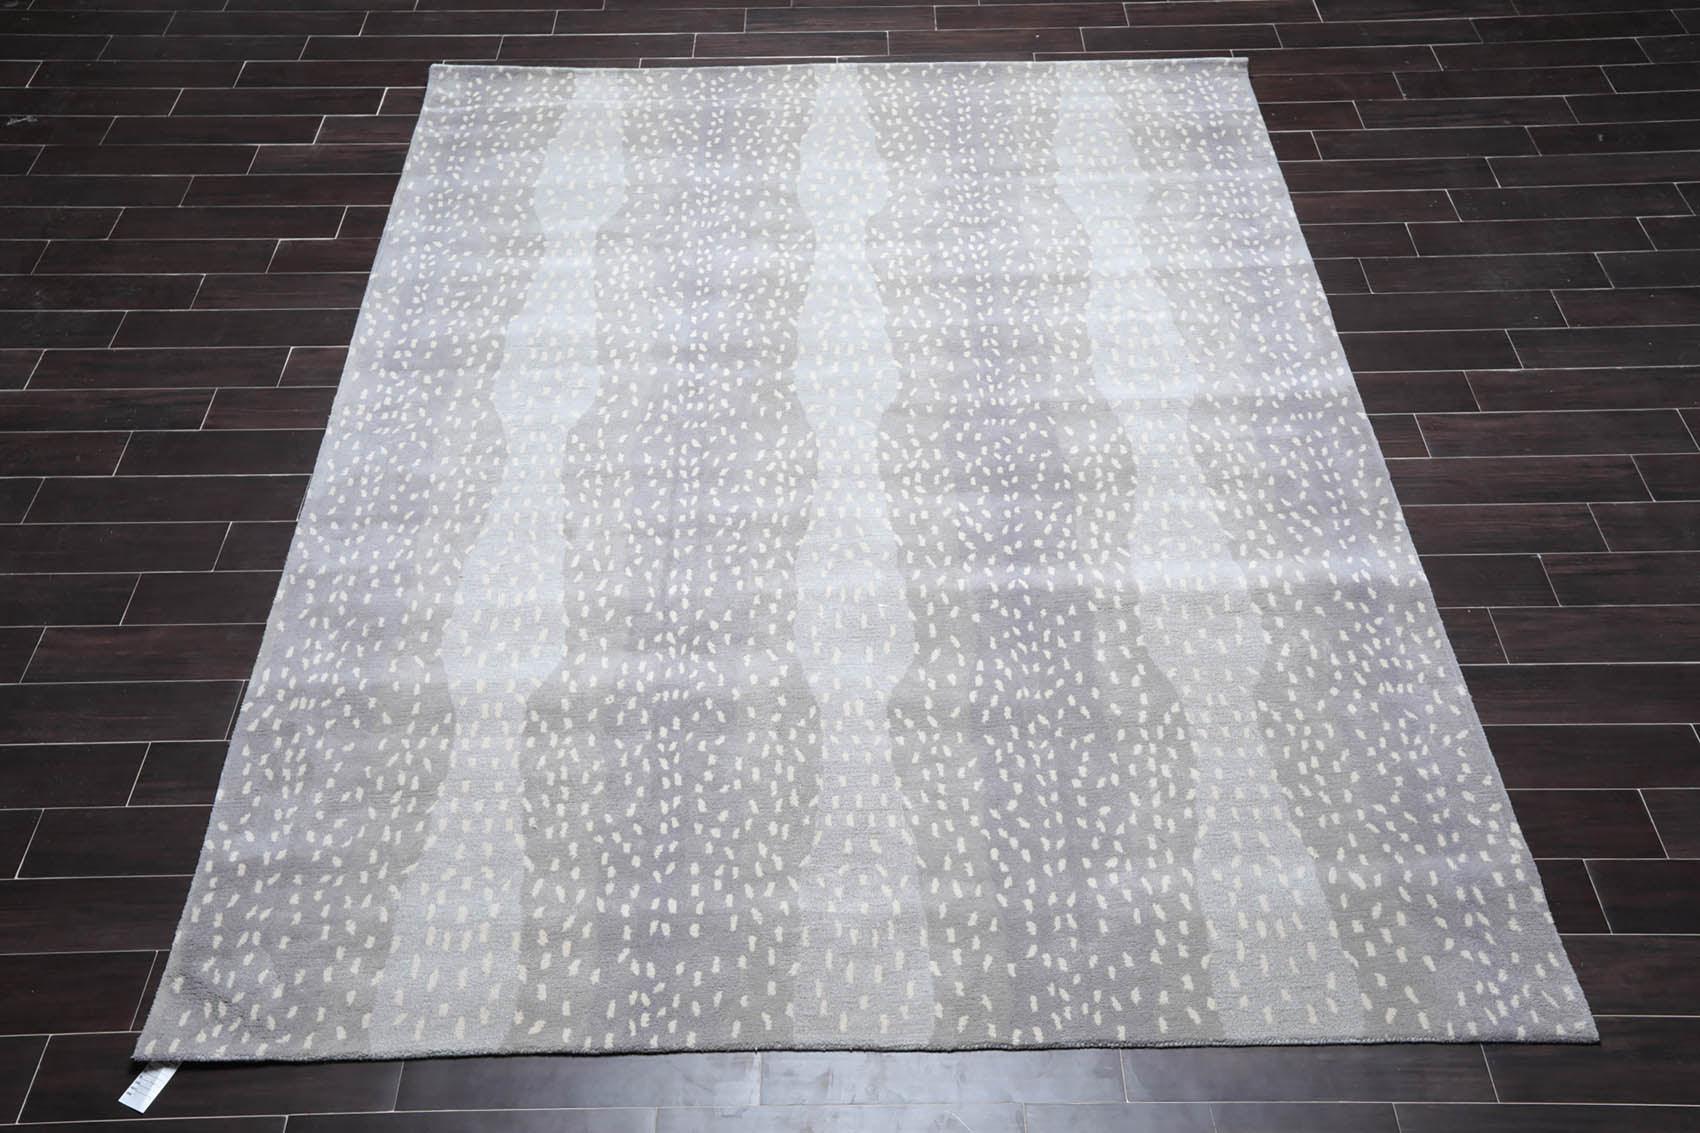 8x10 Gray Wool Rug - Handwoven | Article Texa Contemporary Accessories